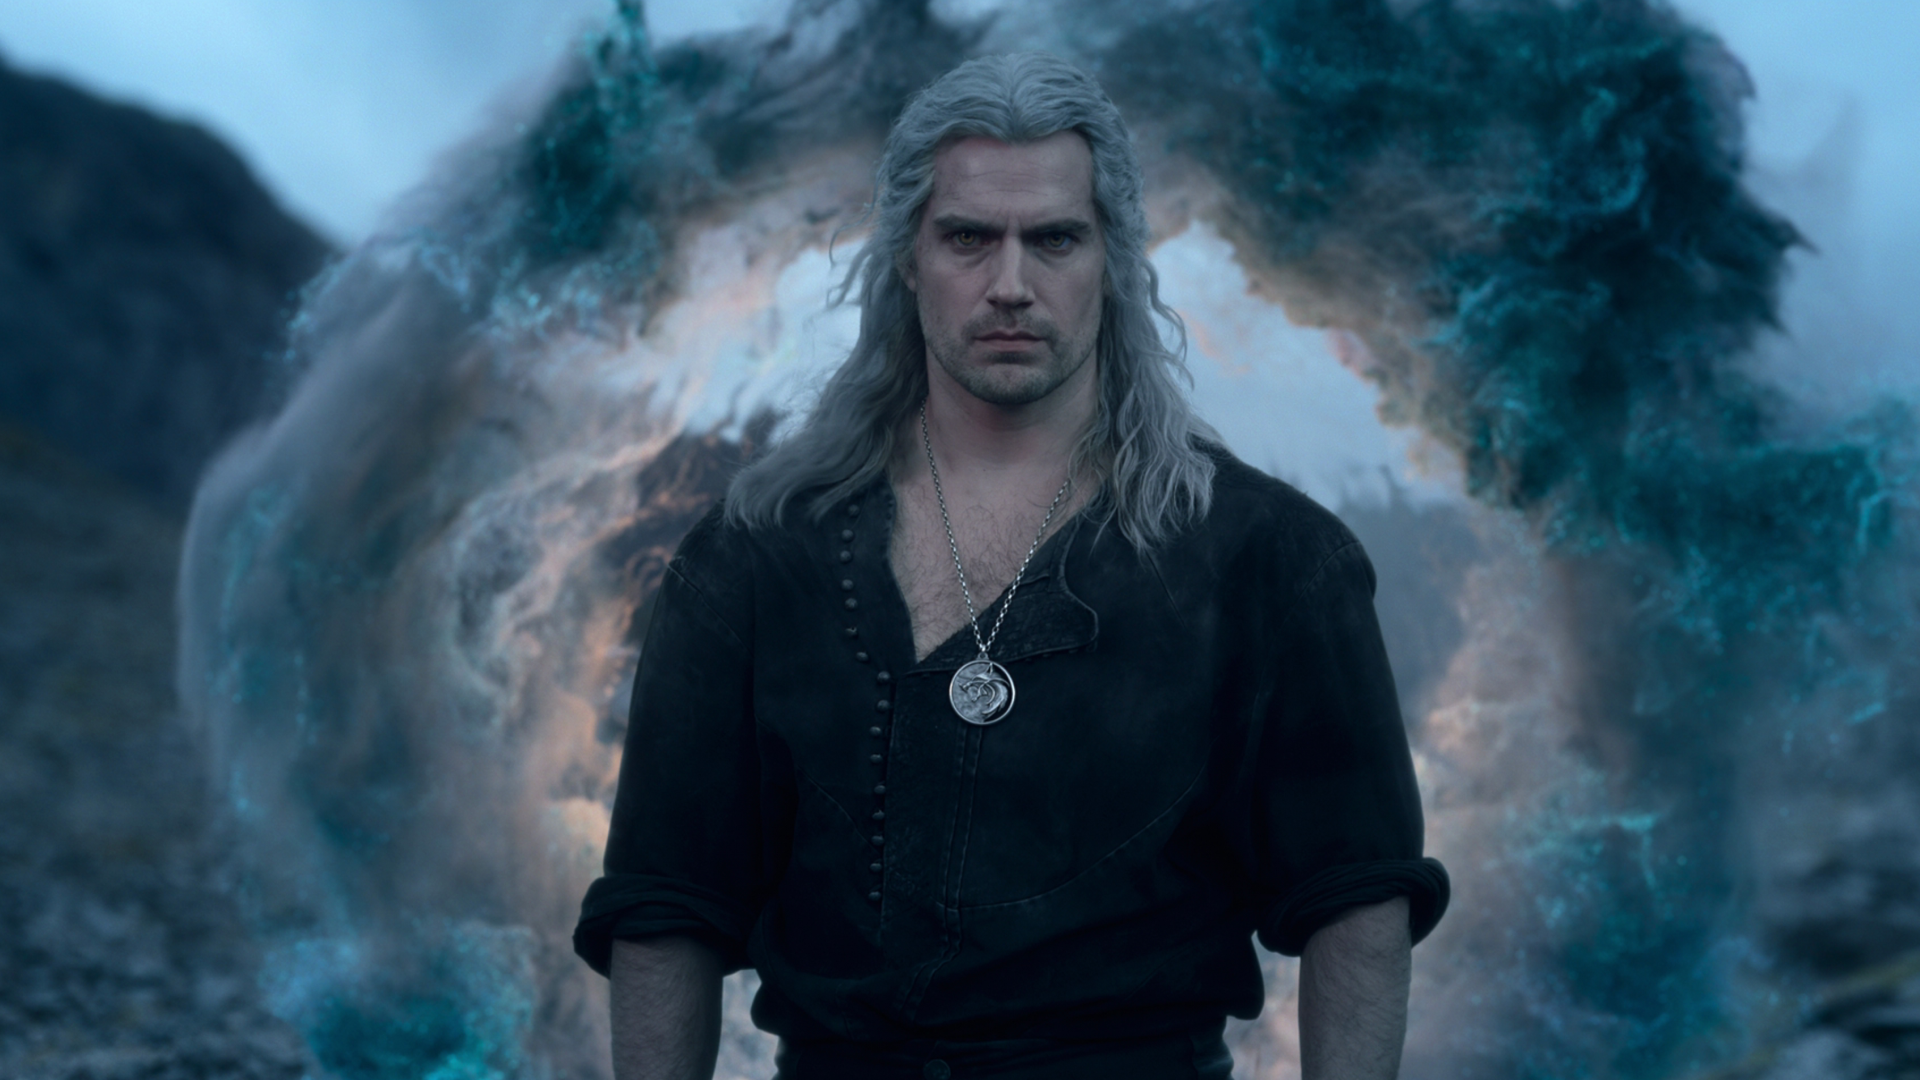 Will Henry Cavill Return to The Witcher In Season 4 as Geralt? – TVLine